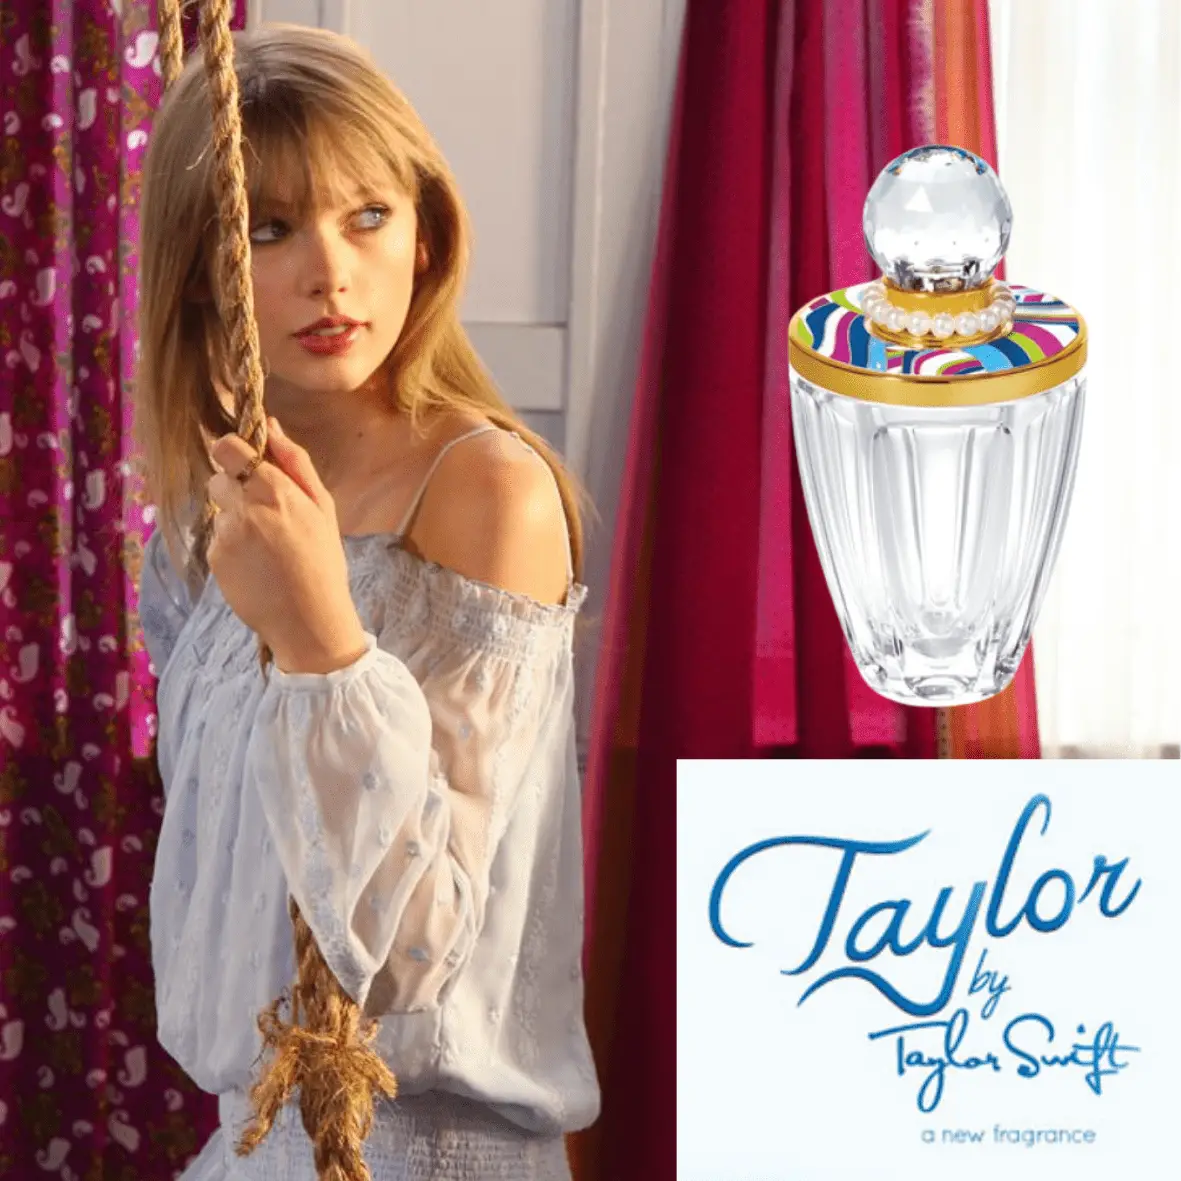 Taylor by Taylor Swift Perfume